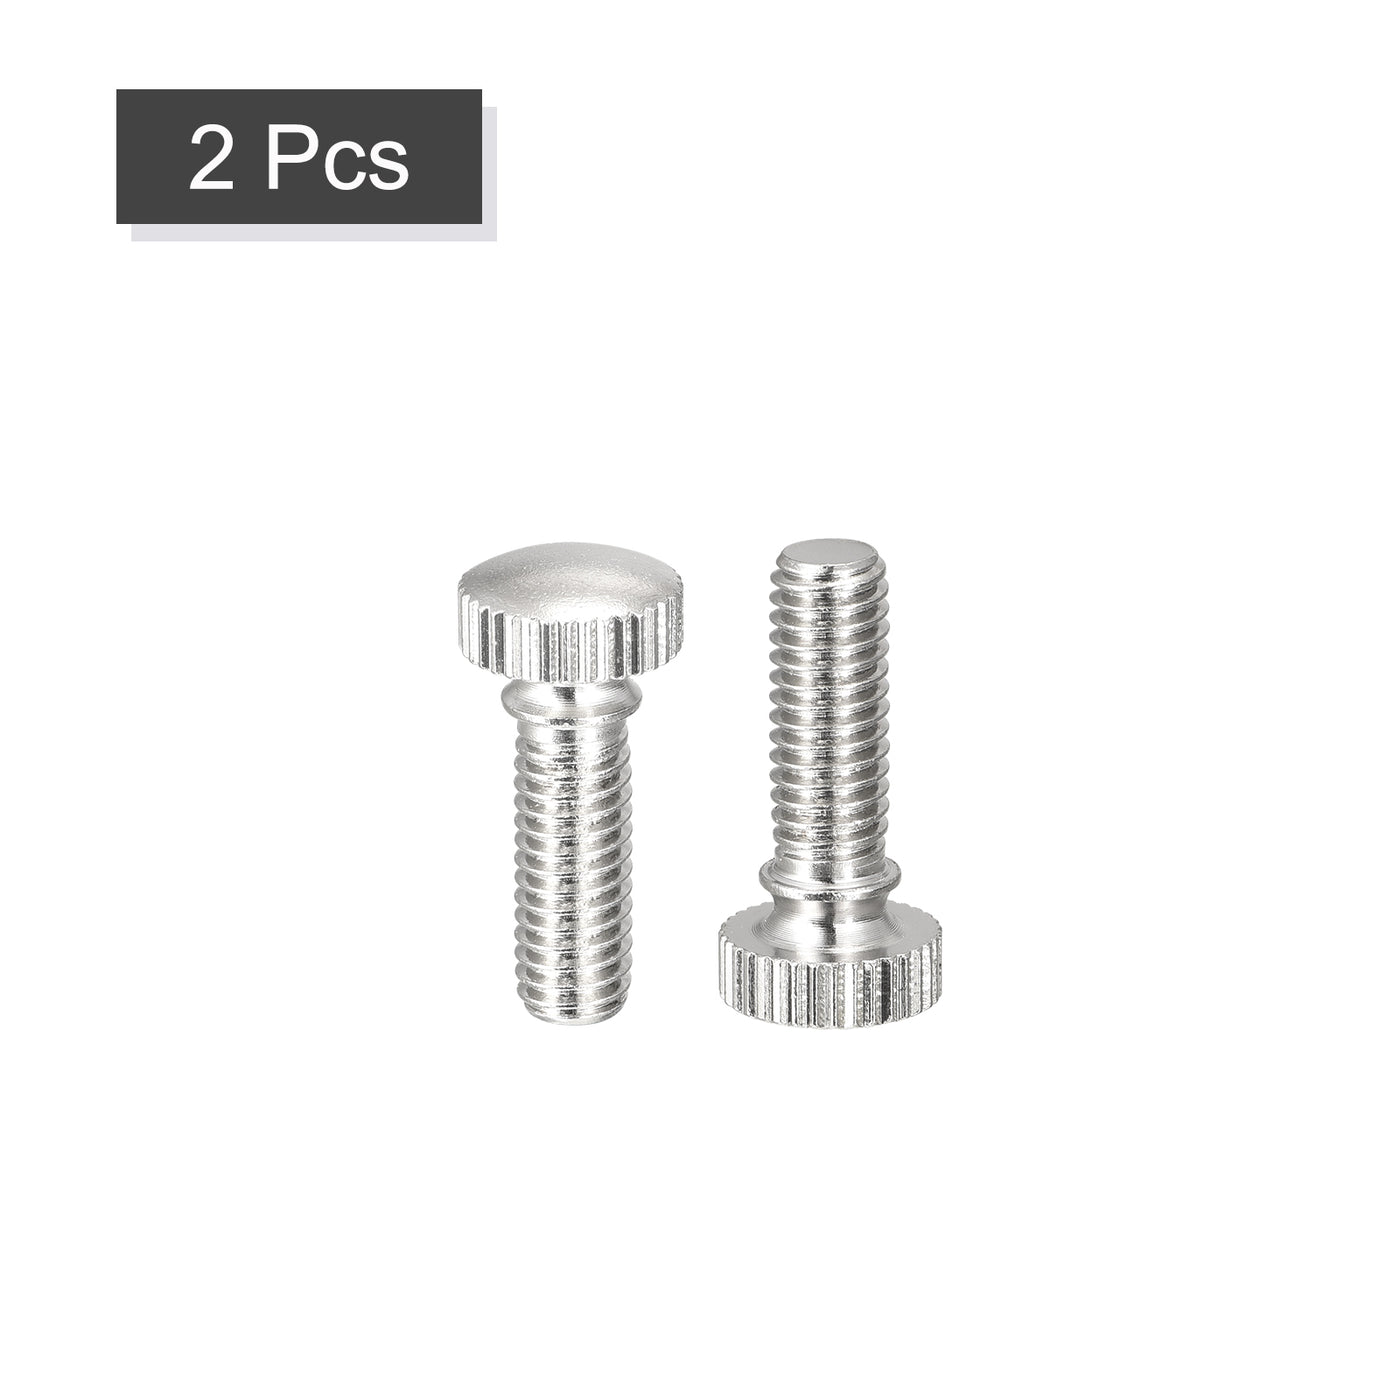 uxcell Uxcell Knurled Thumb Screws, M6x16mm Brass Shoulder Bolts Grip Knobs Fasteners, Nickel Plated 2Pcs